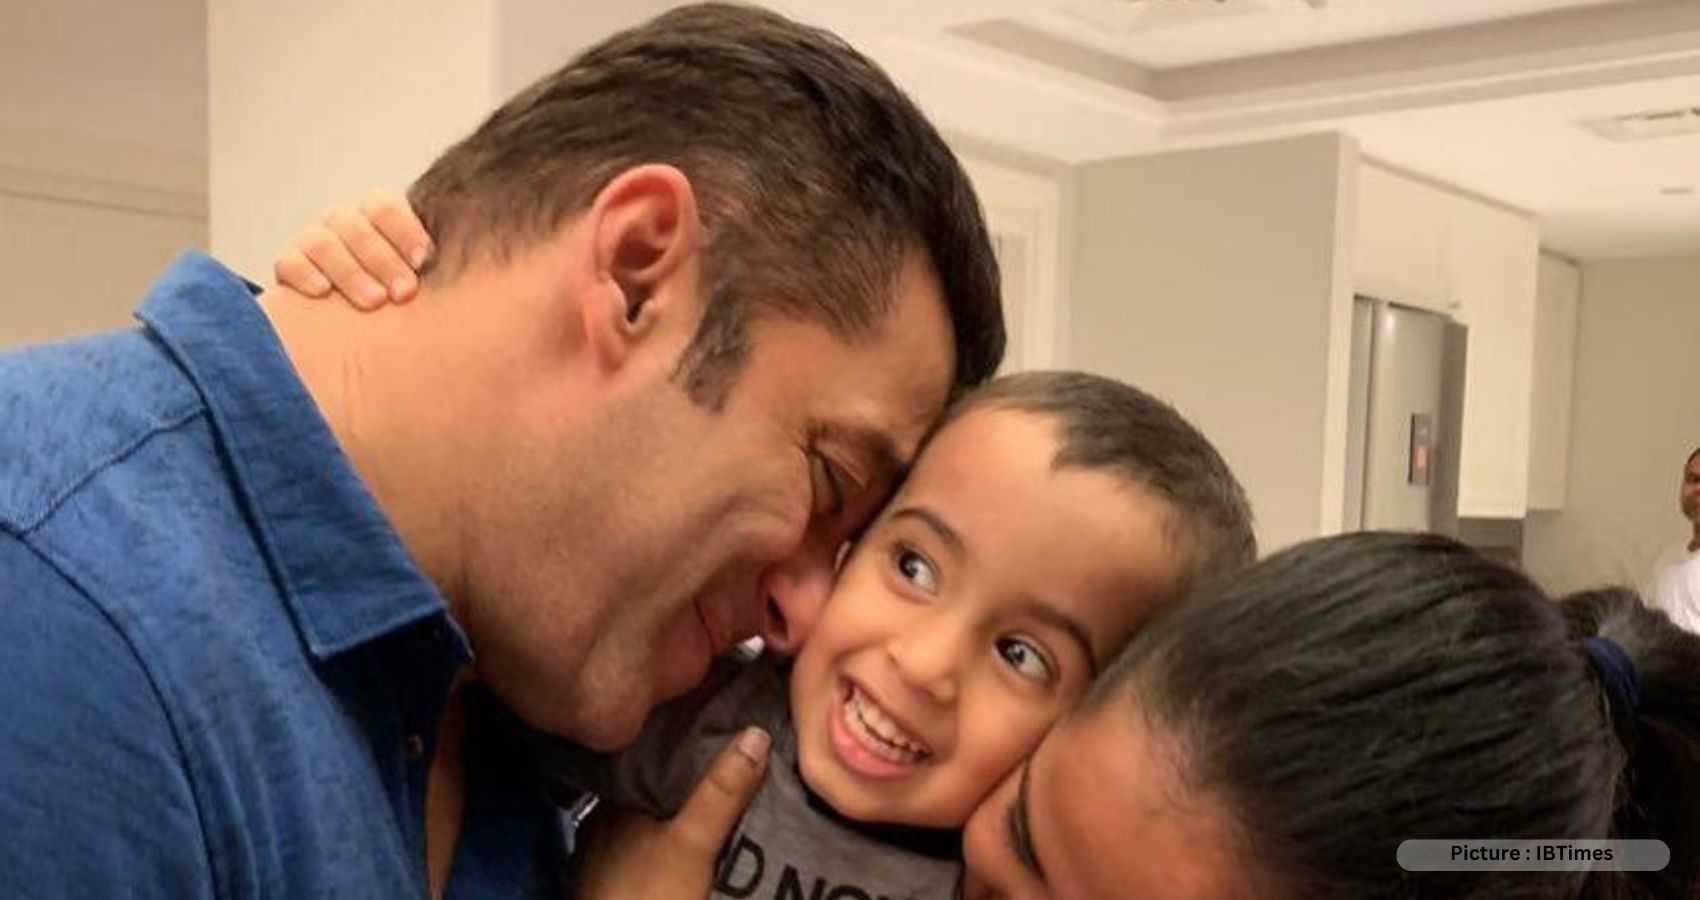 Salman Khan Wants To Be A Father, Says Law Doesn’t Support It